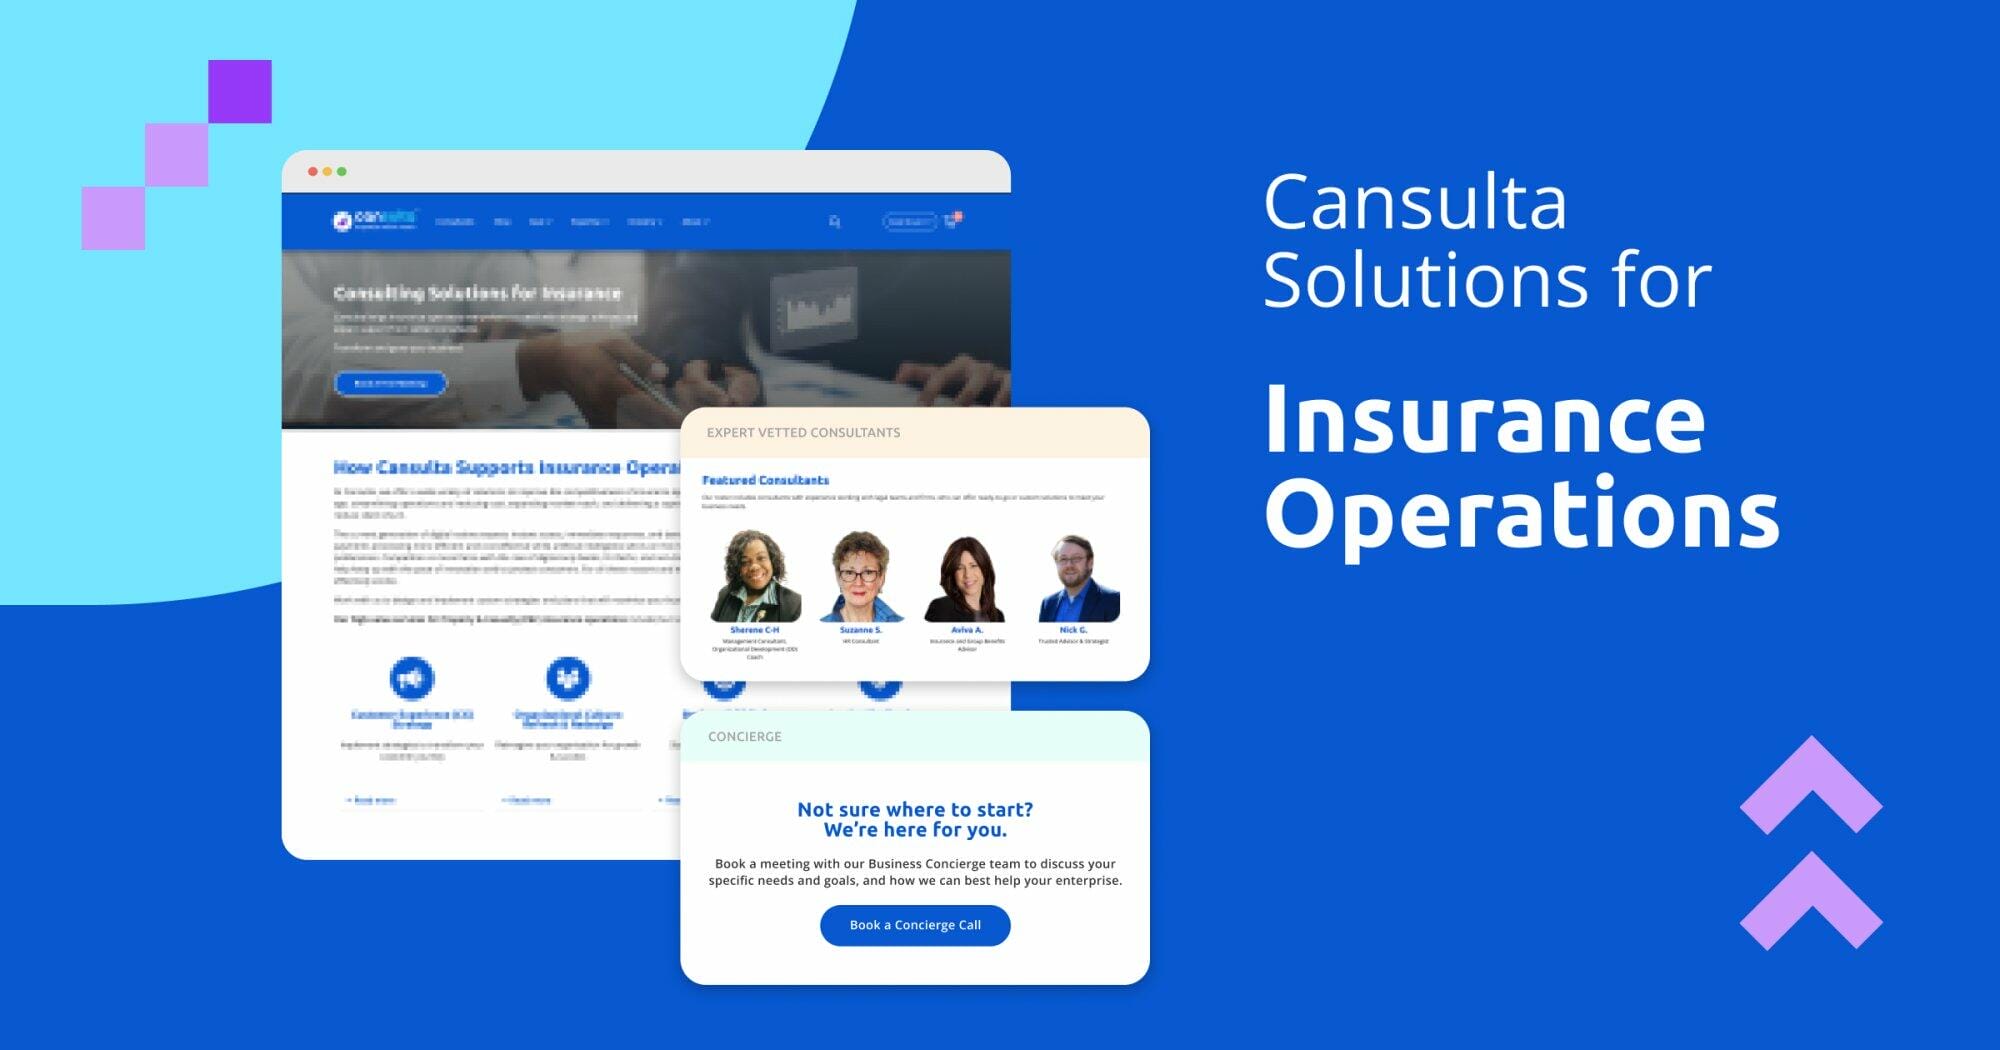 Consulting Services for Insurance Operations